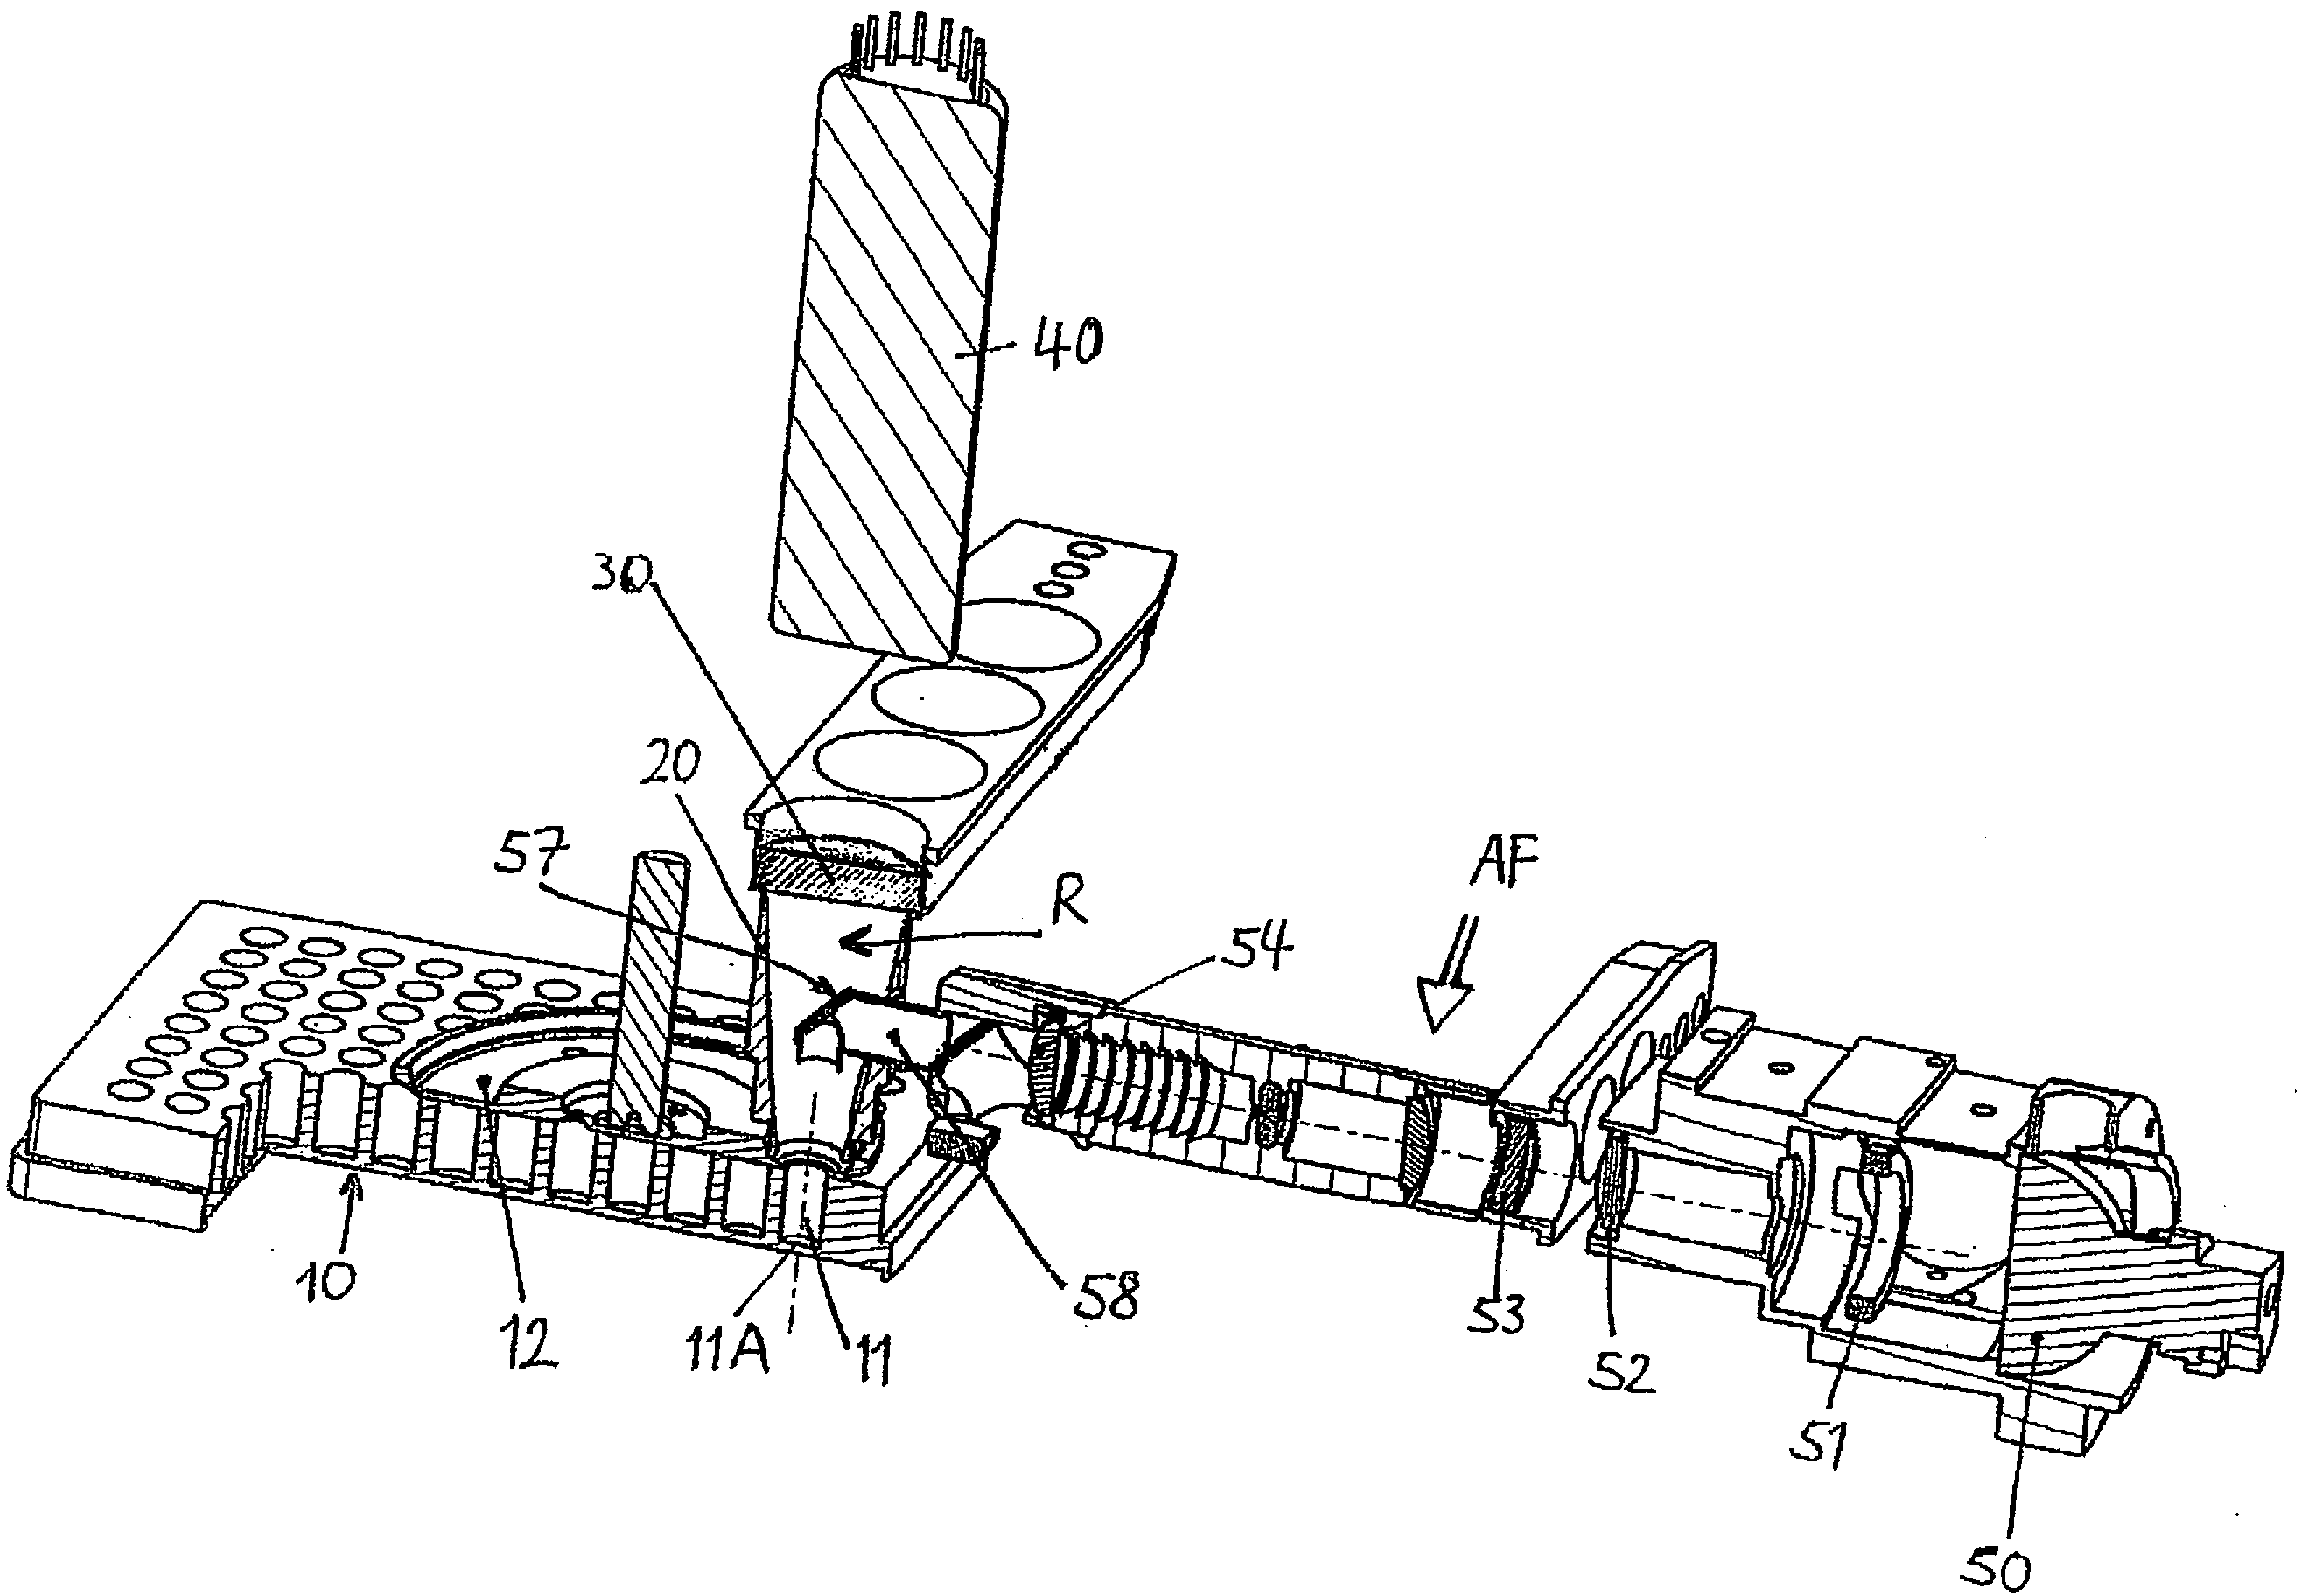 Apparatus for selected measurement of, in particular luminescent and/or fluorescent radiation